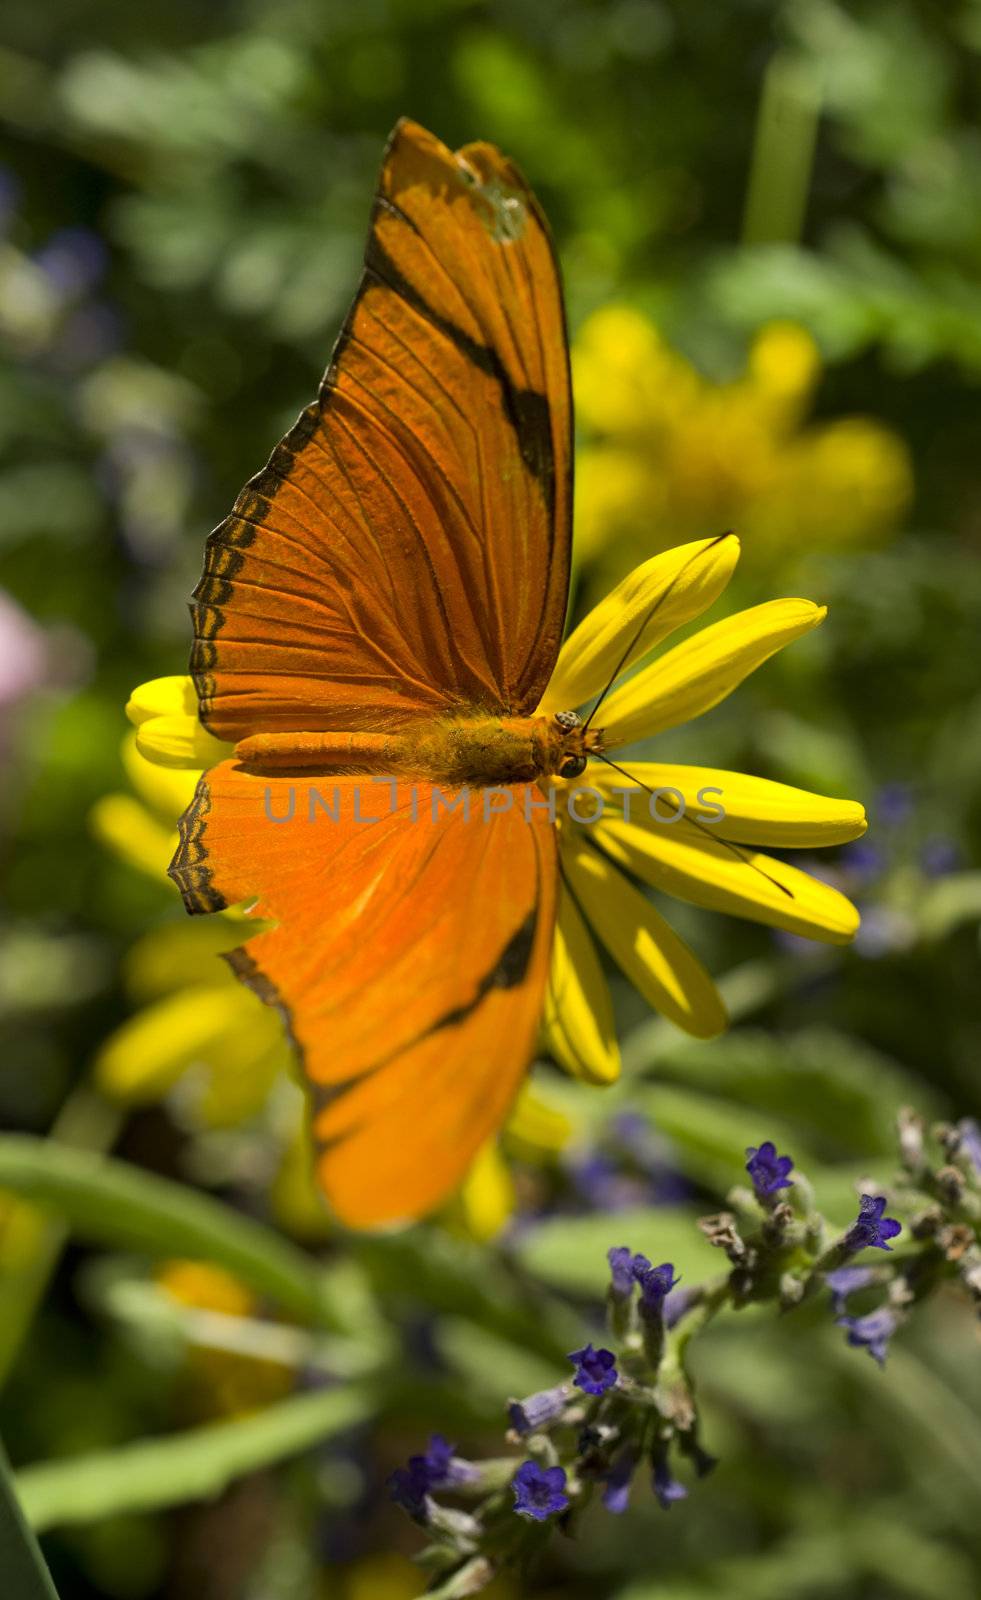 A Butterfly lands for some pollination